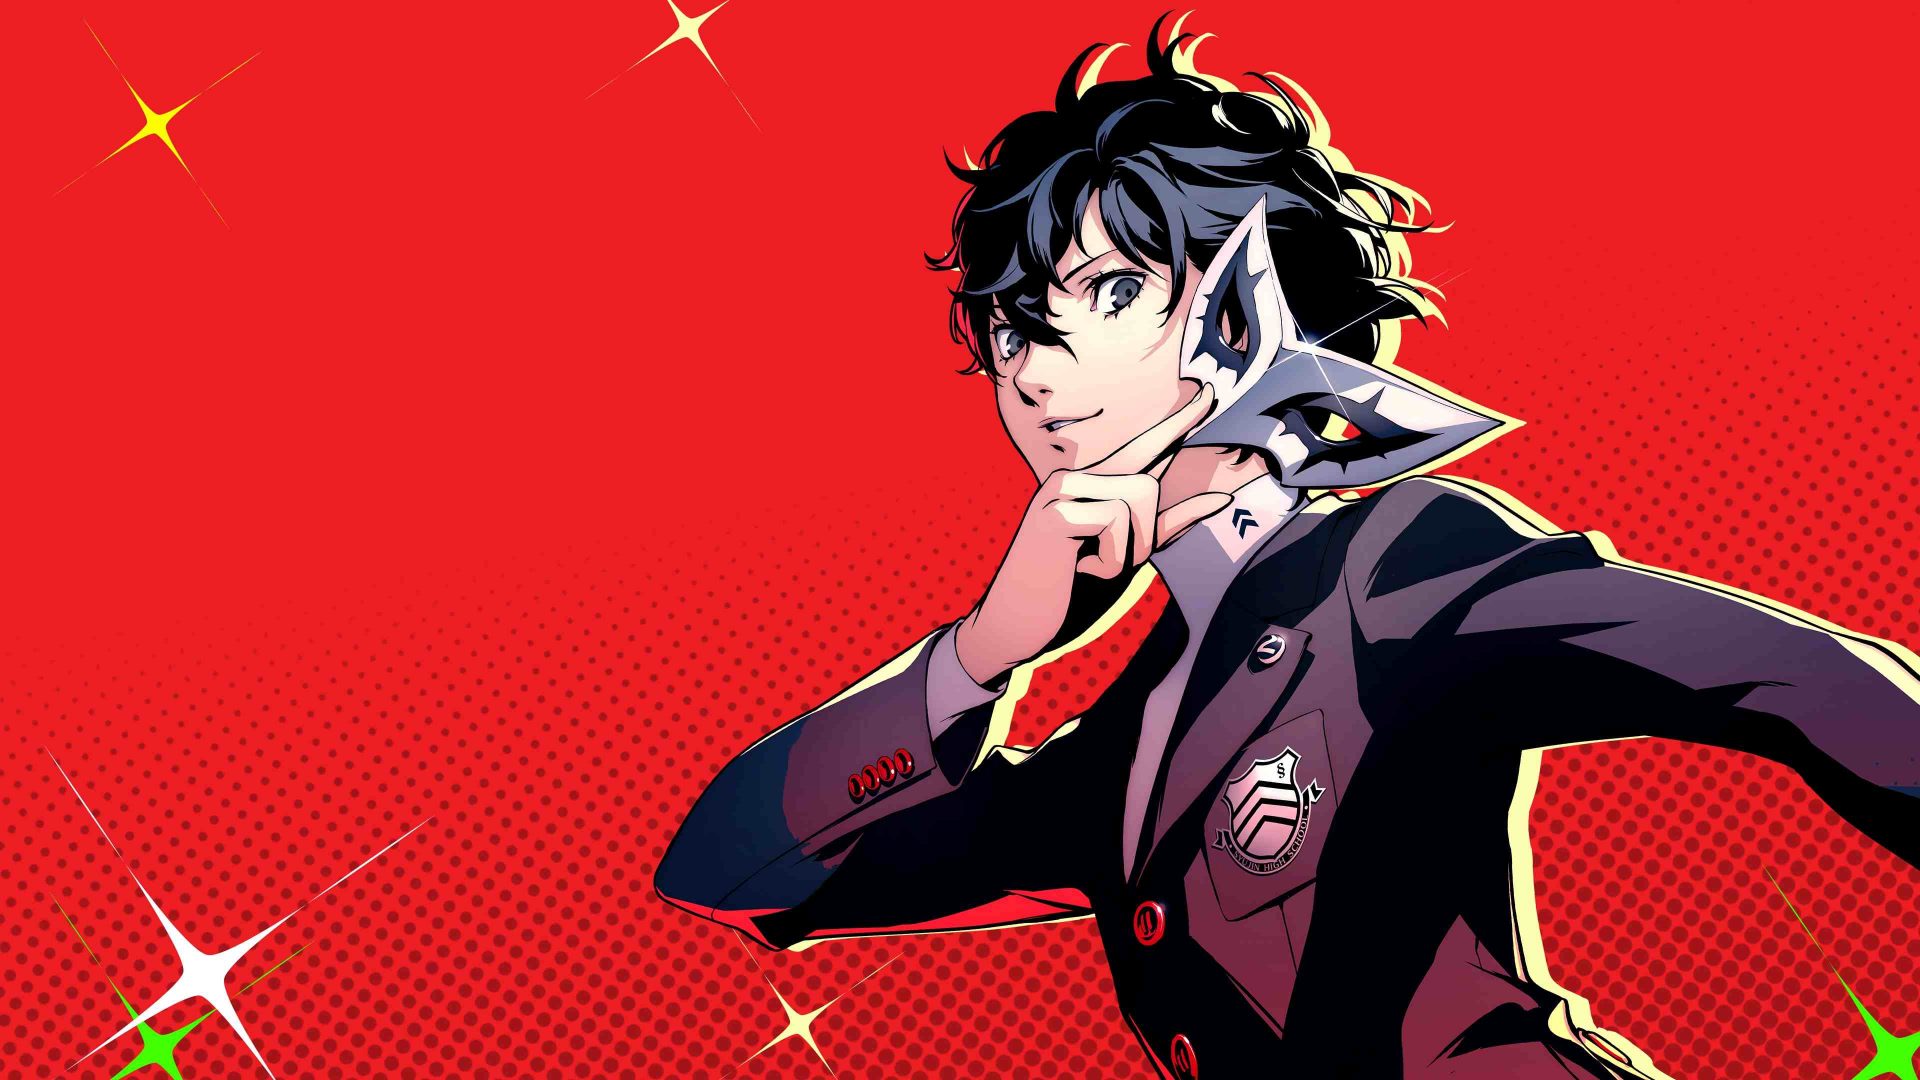 Persona 5 Royal (Switch) Review